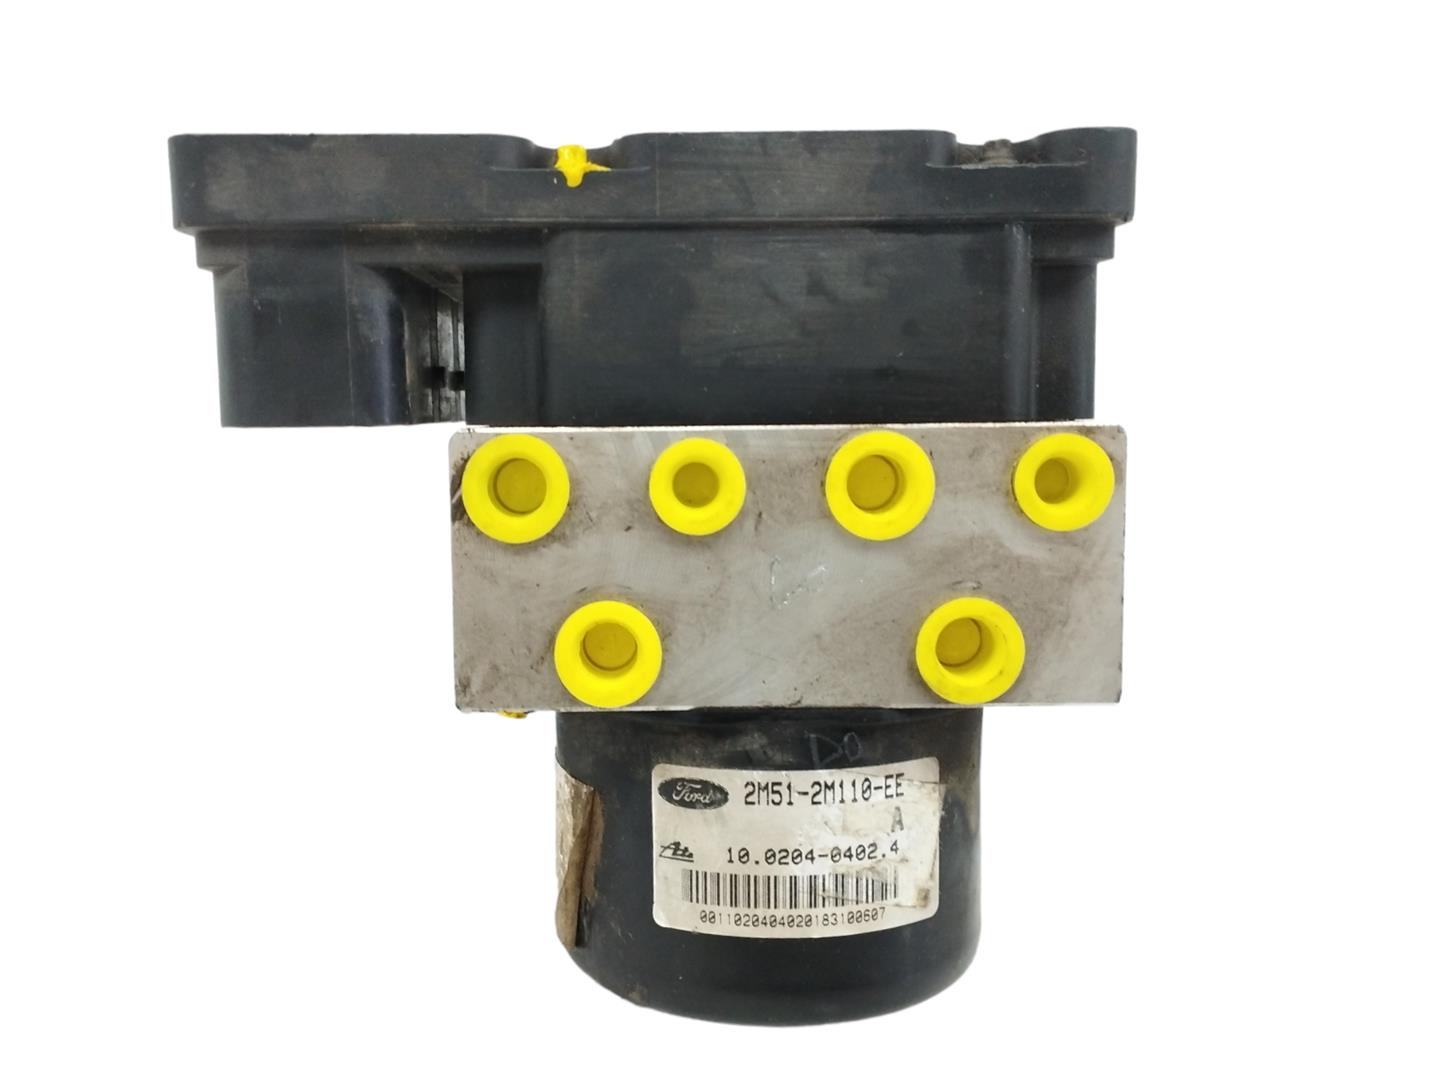 FORD Focus 1 generation (1998-2010) ABS pumpe 2M512M110EE, 10020404024 22784947